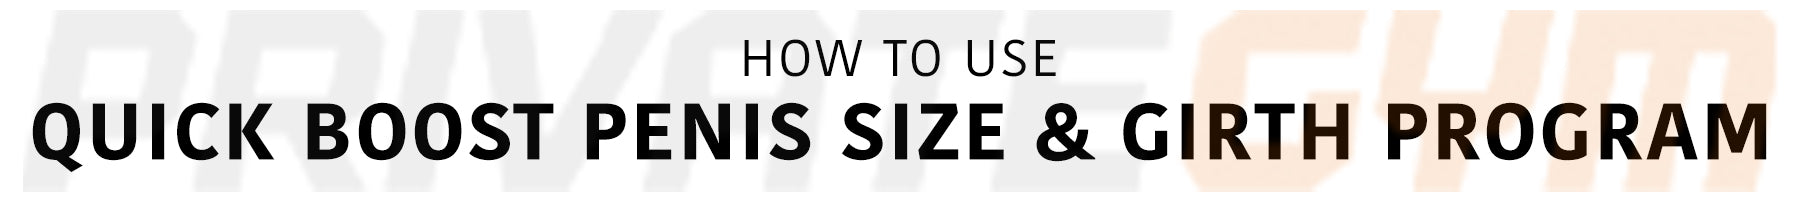 How to Use Quick Boost Penis Size & Girth Program Desktop